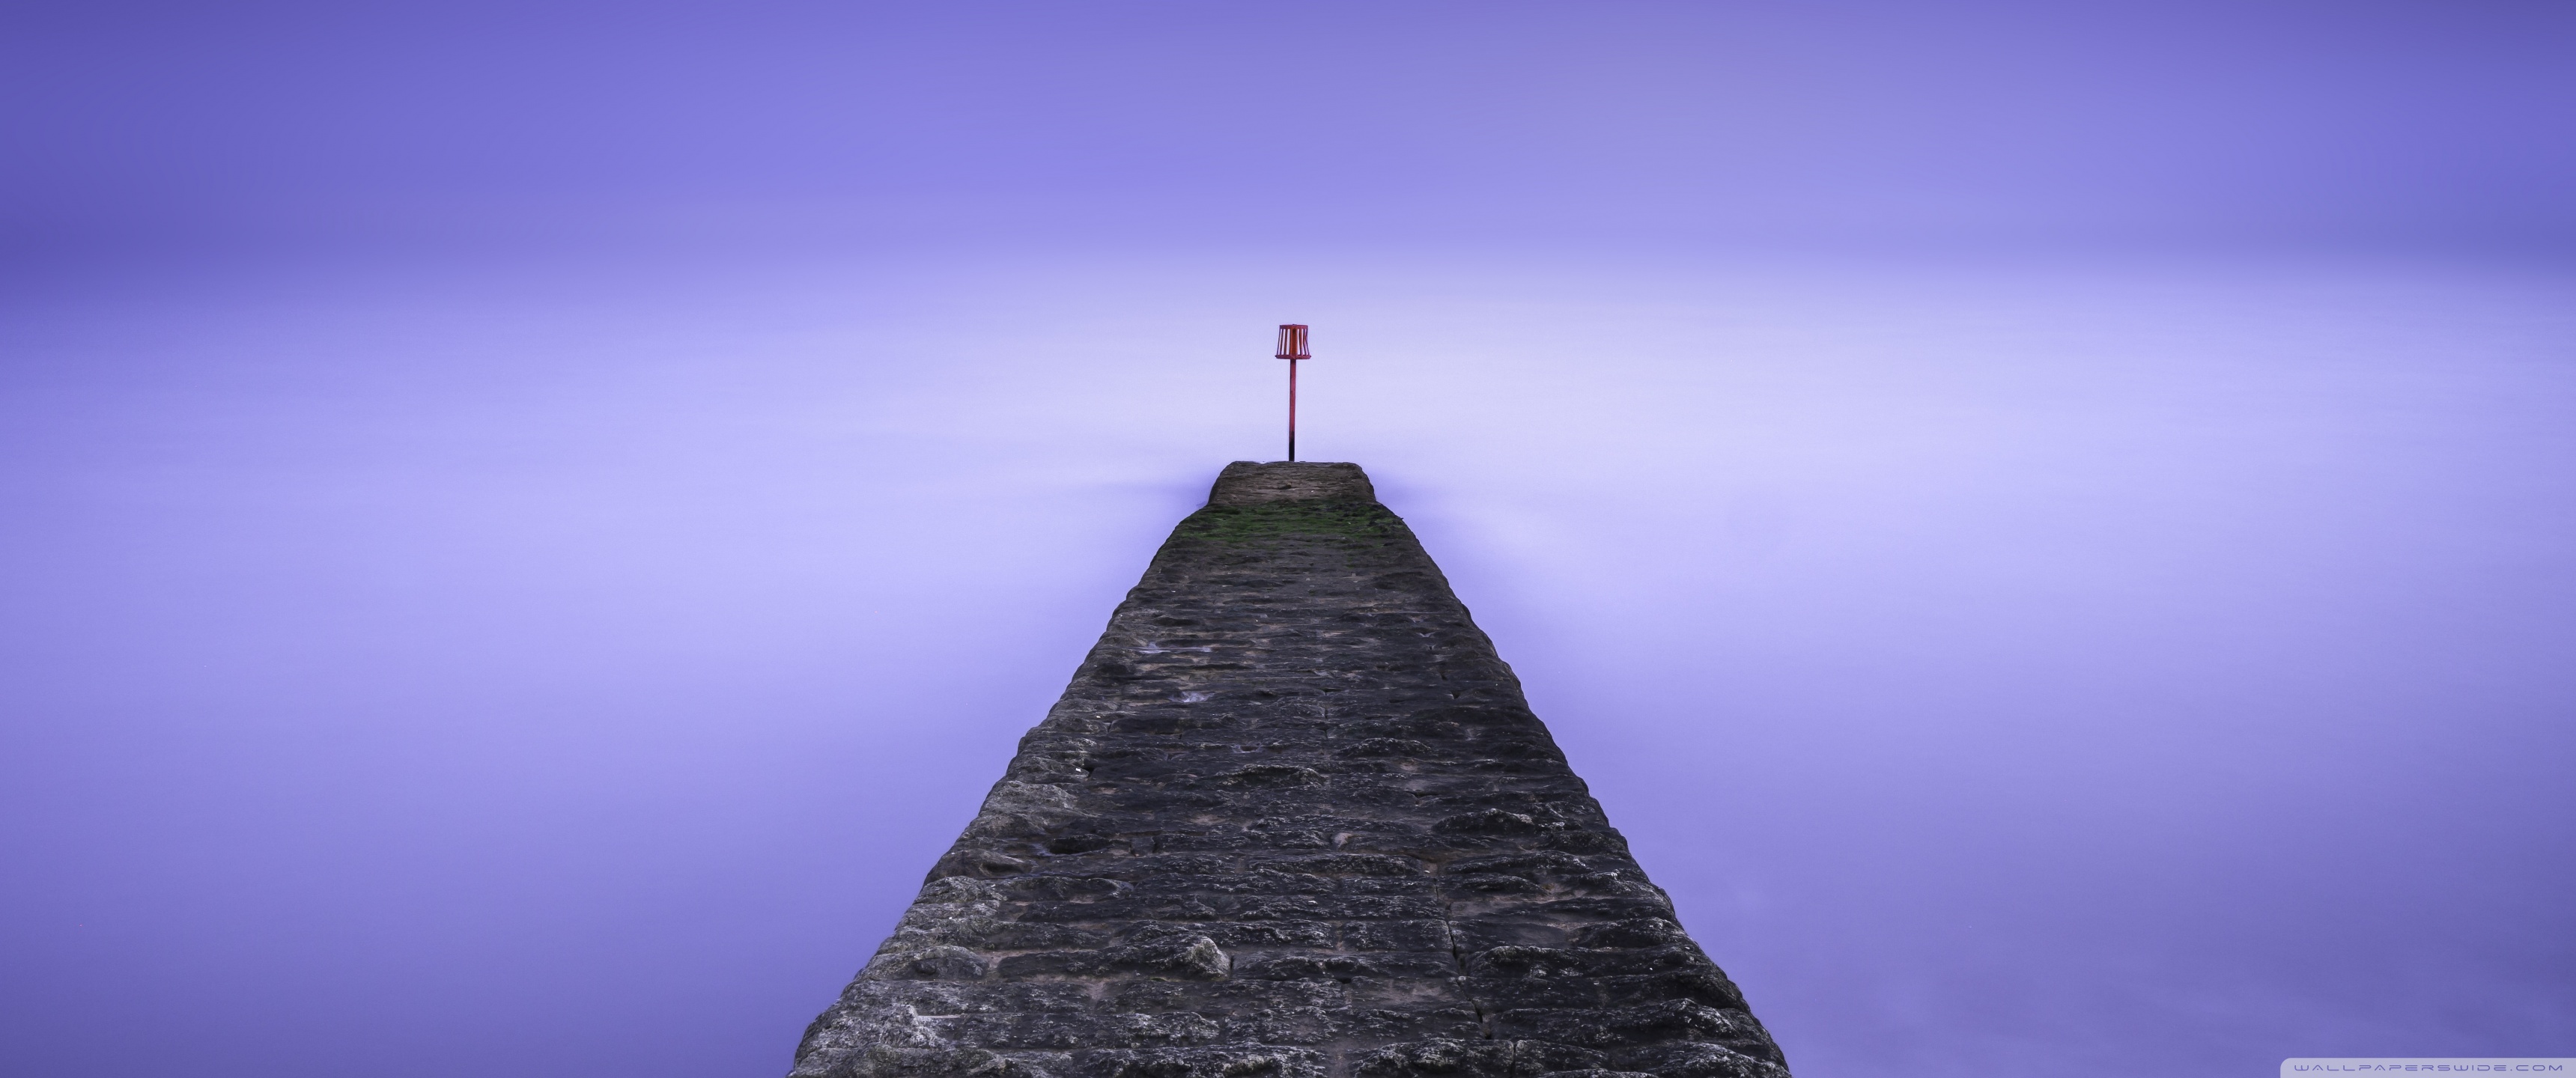 A stone pier leading to a red buoy on a purple background - 3440x1440